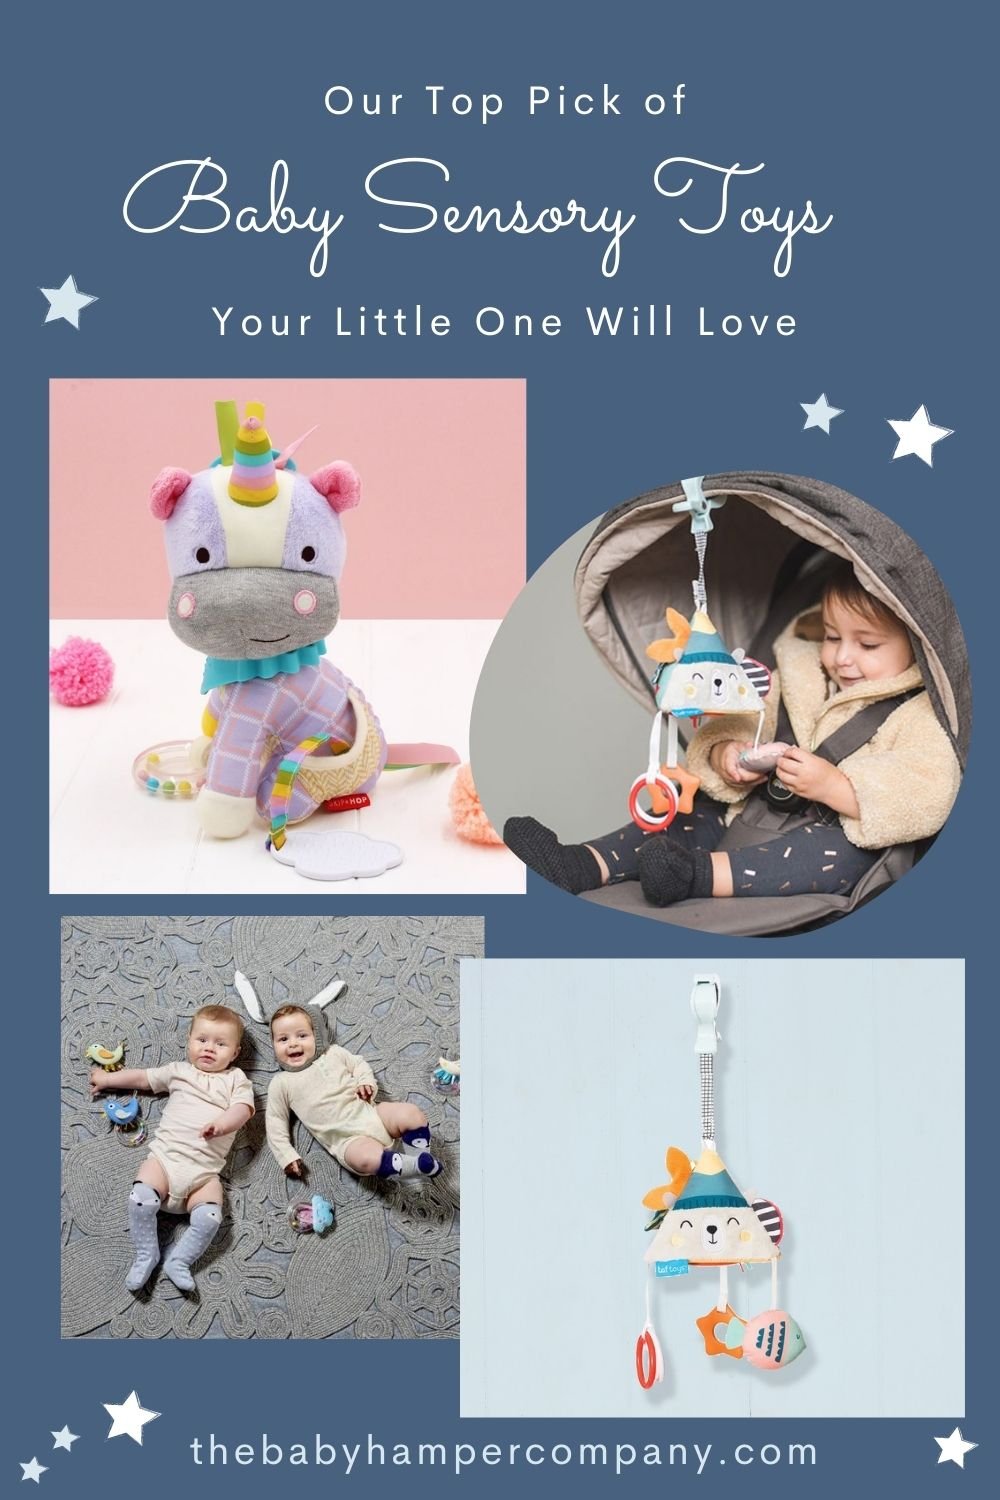 Our Top Pick of Baby Sensory Toys